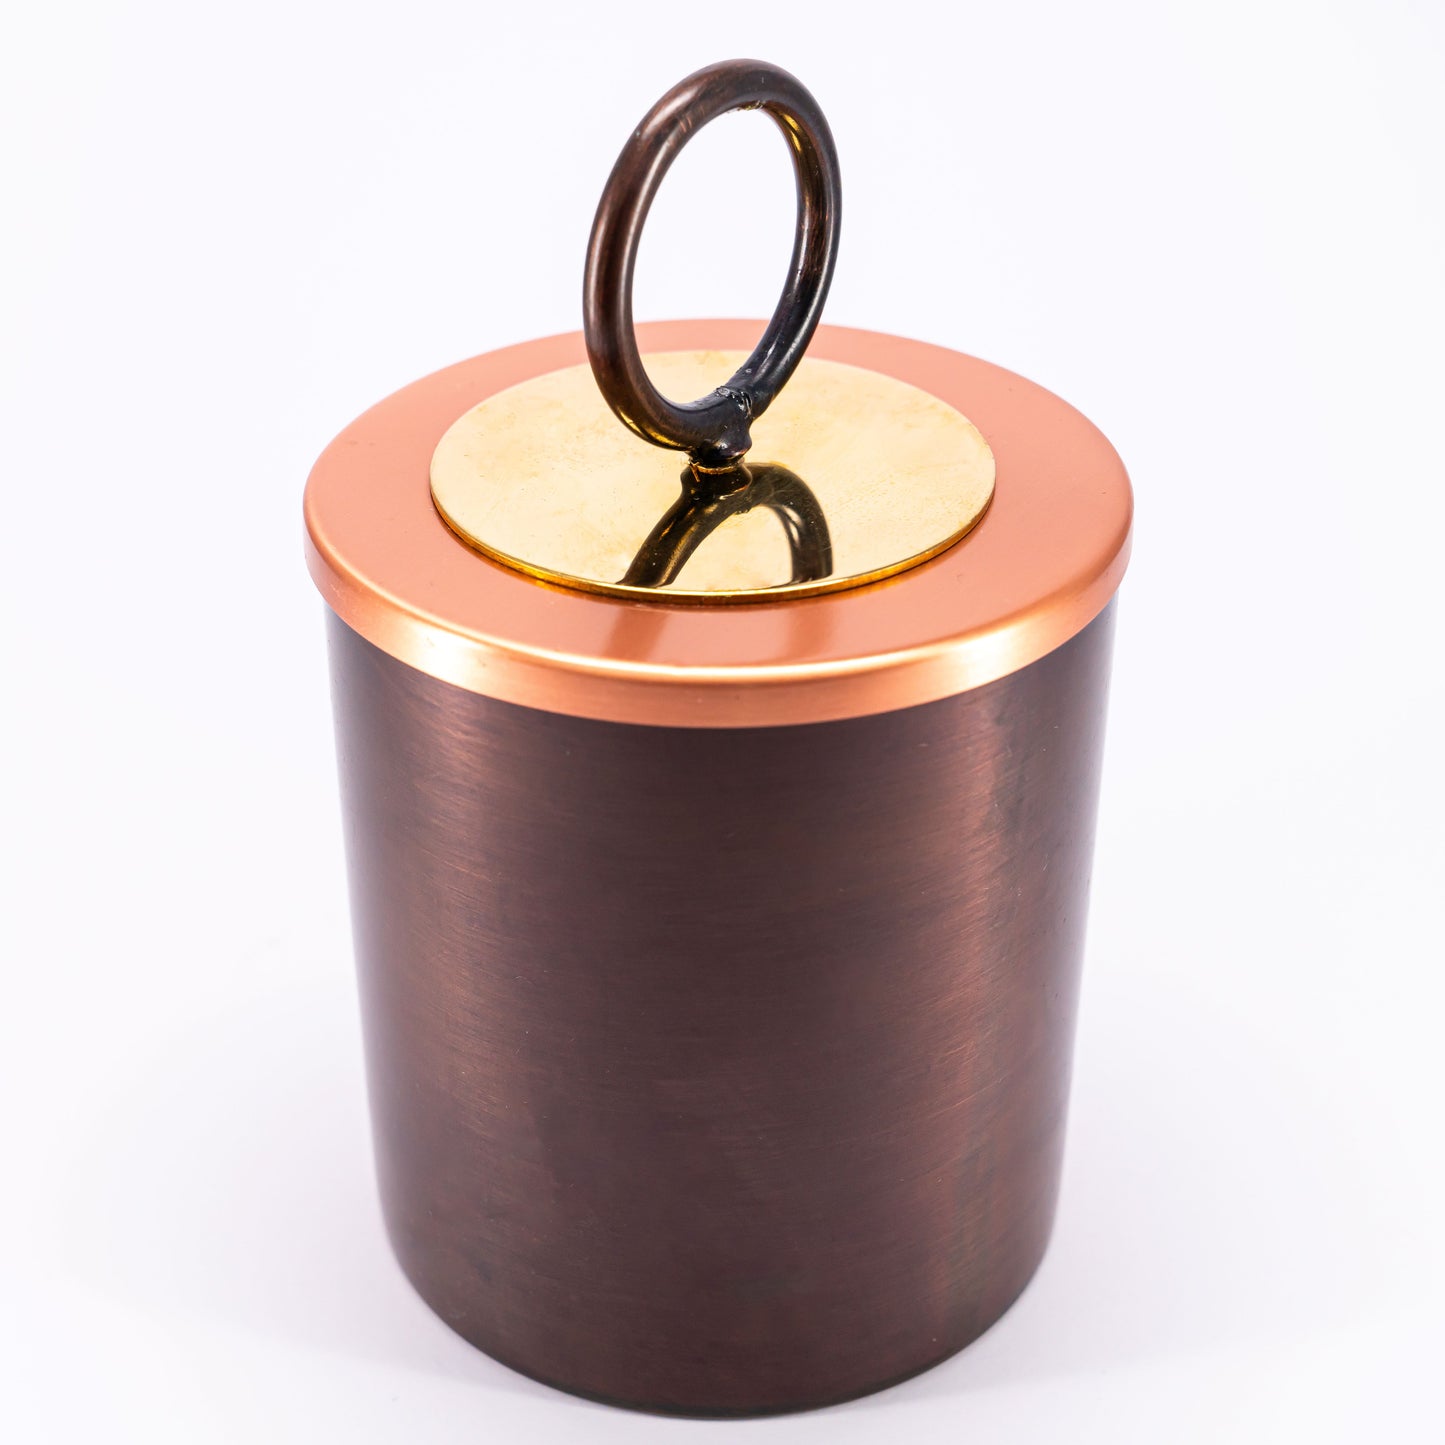 TAMRA hand poured scented candle in handmade copper container